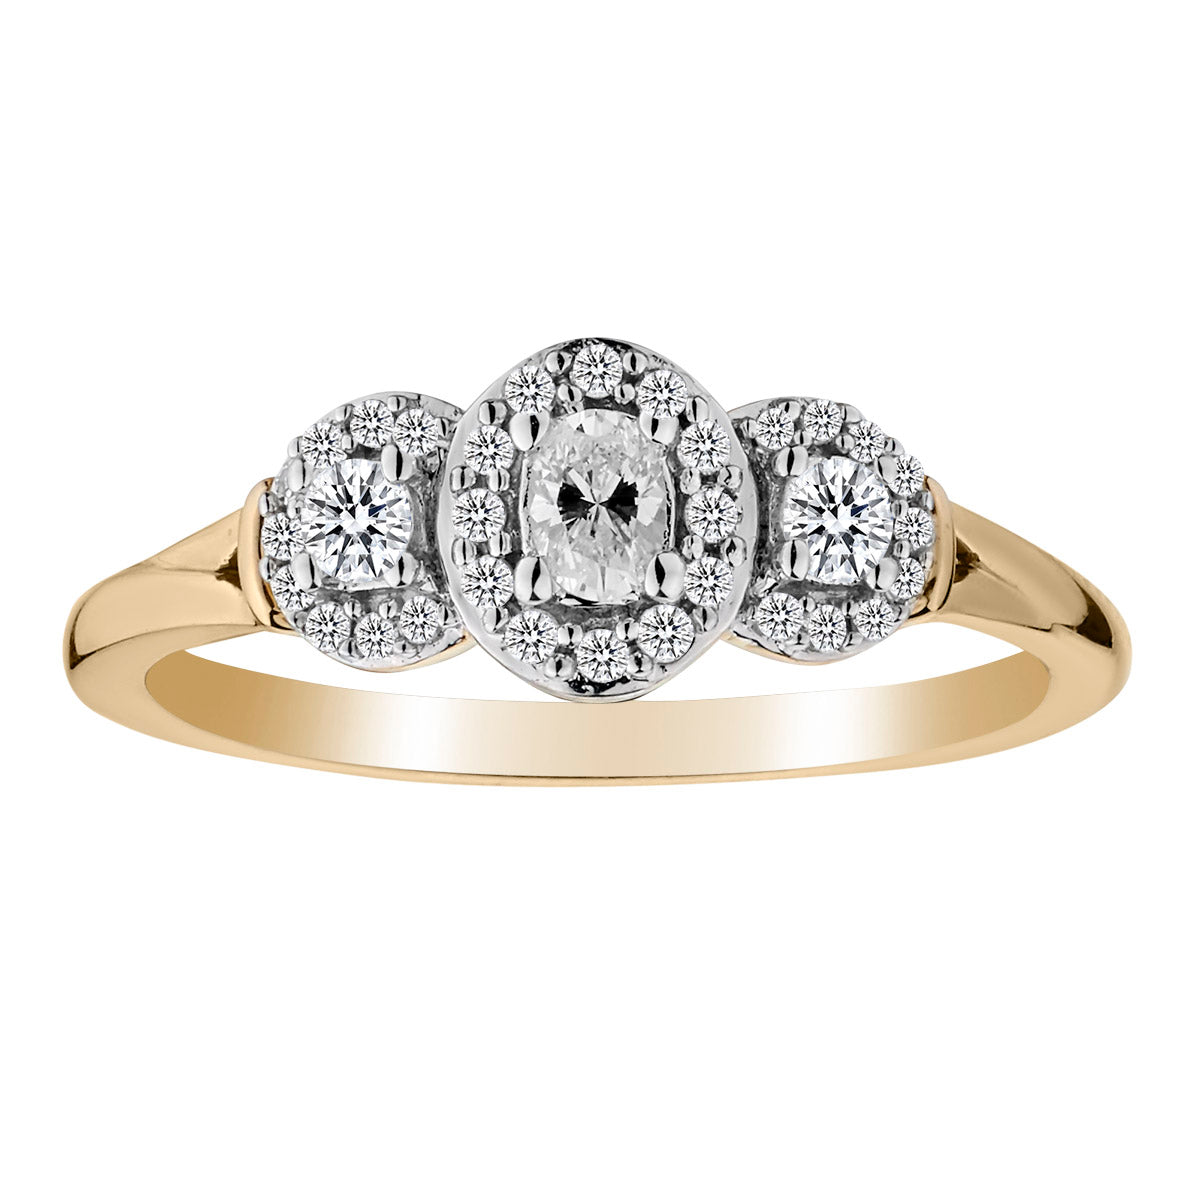 .40 Carat of Diamonds "Past, Present, Future" Ring, 10kt Yellow Gold......................NOW